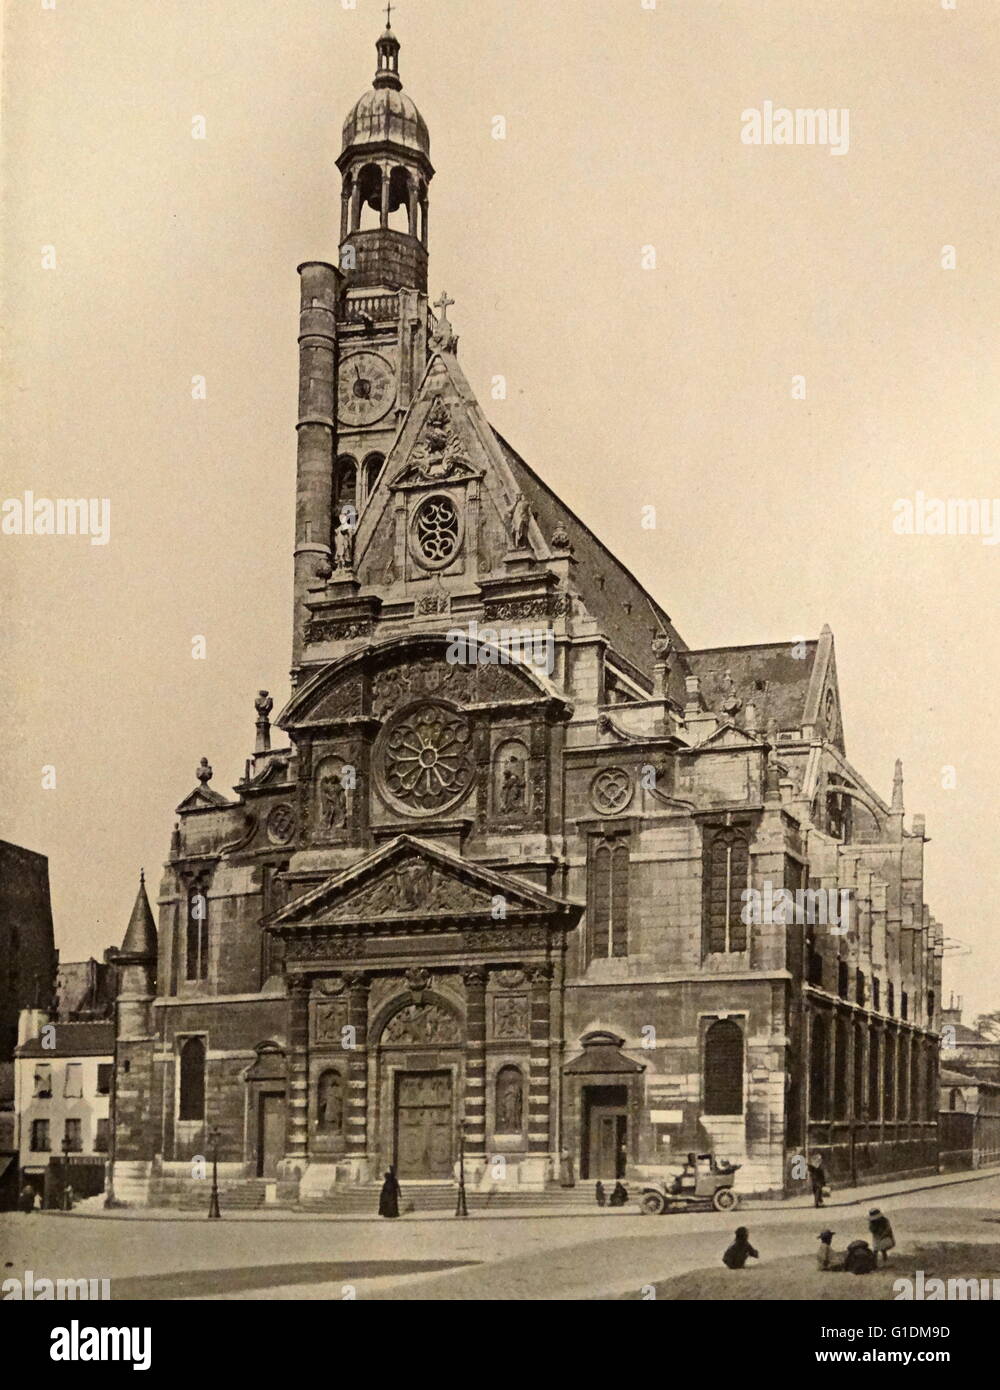 Print of the exterior of Saint-Étienne-du-Mont, a church in Paris, France. Dated 19th Century Stock Photo